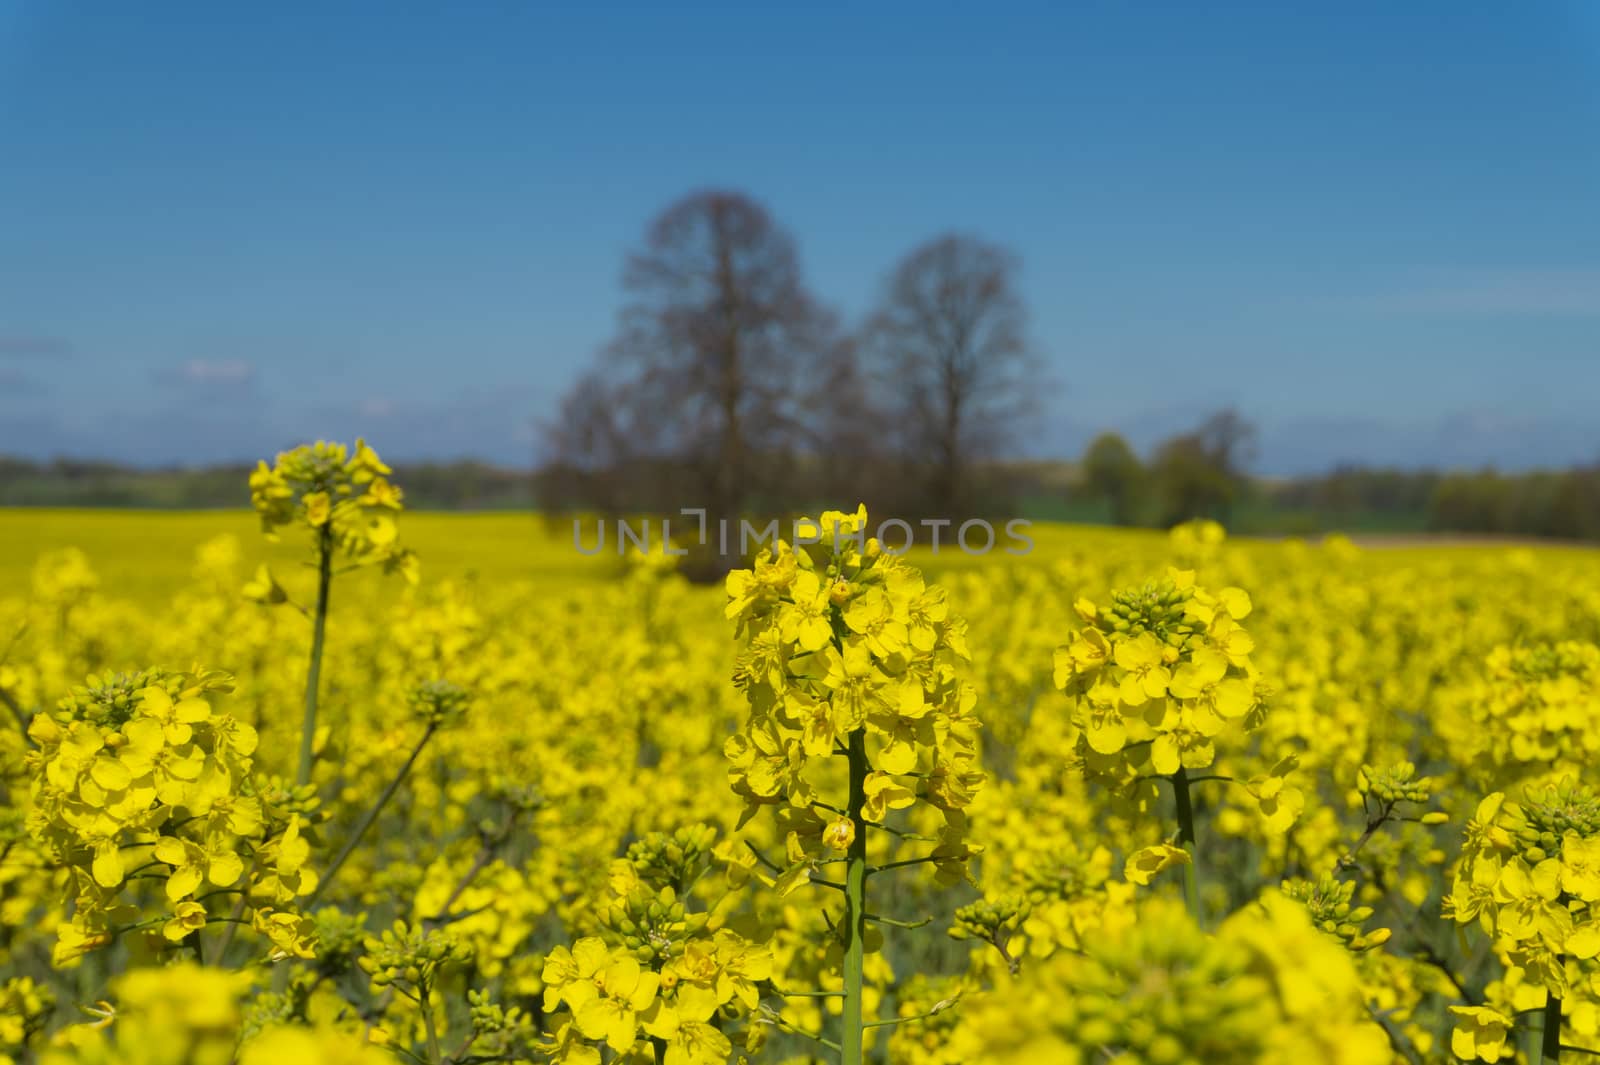 Close up on a single spike of bright yellow rape seed flowers growing in an agricultural field against a blue sky